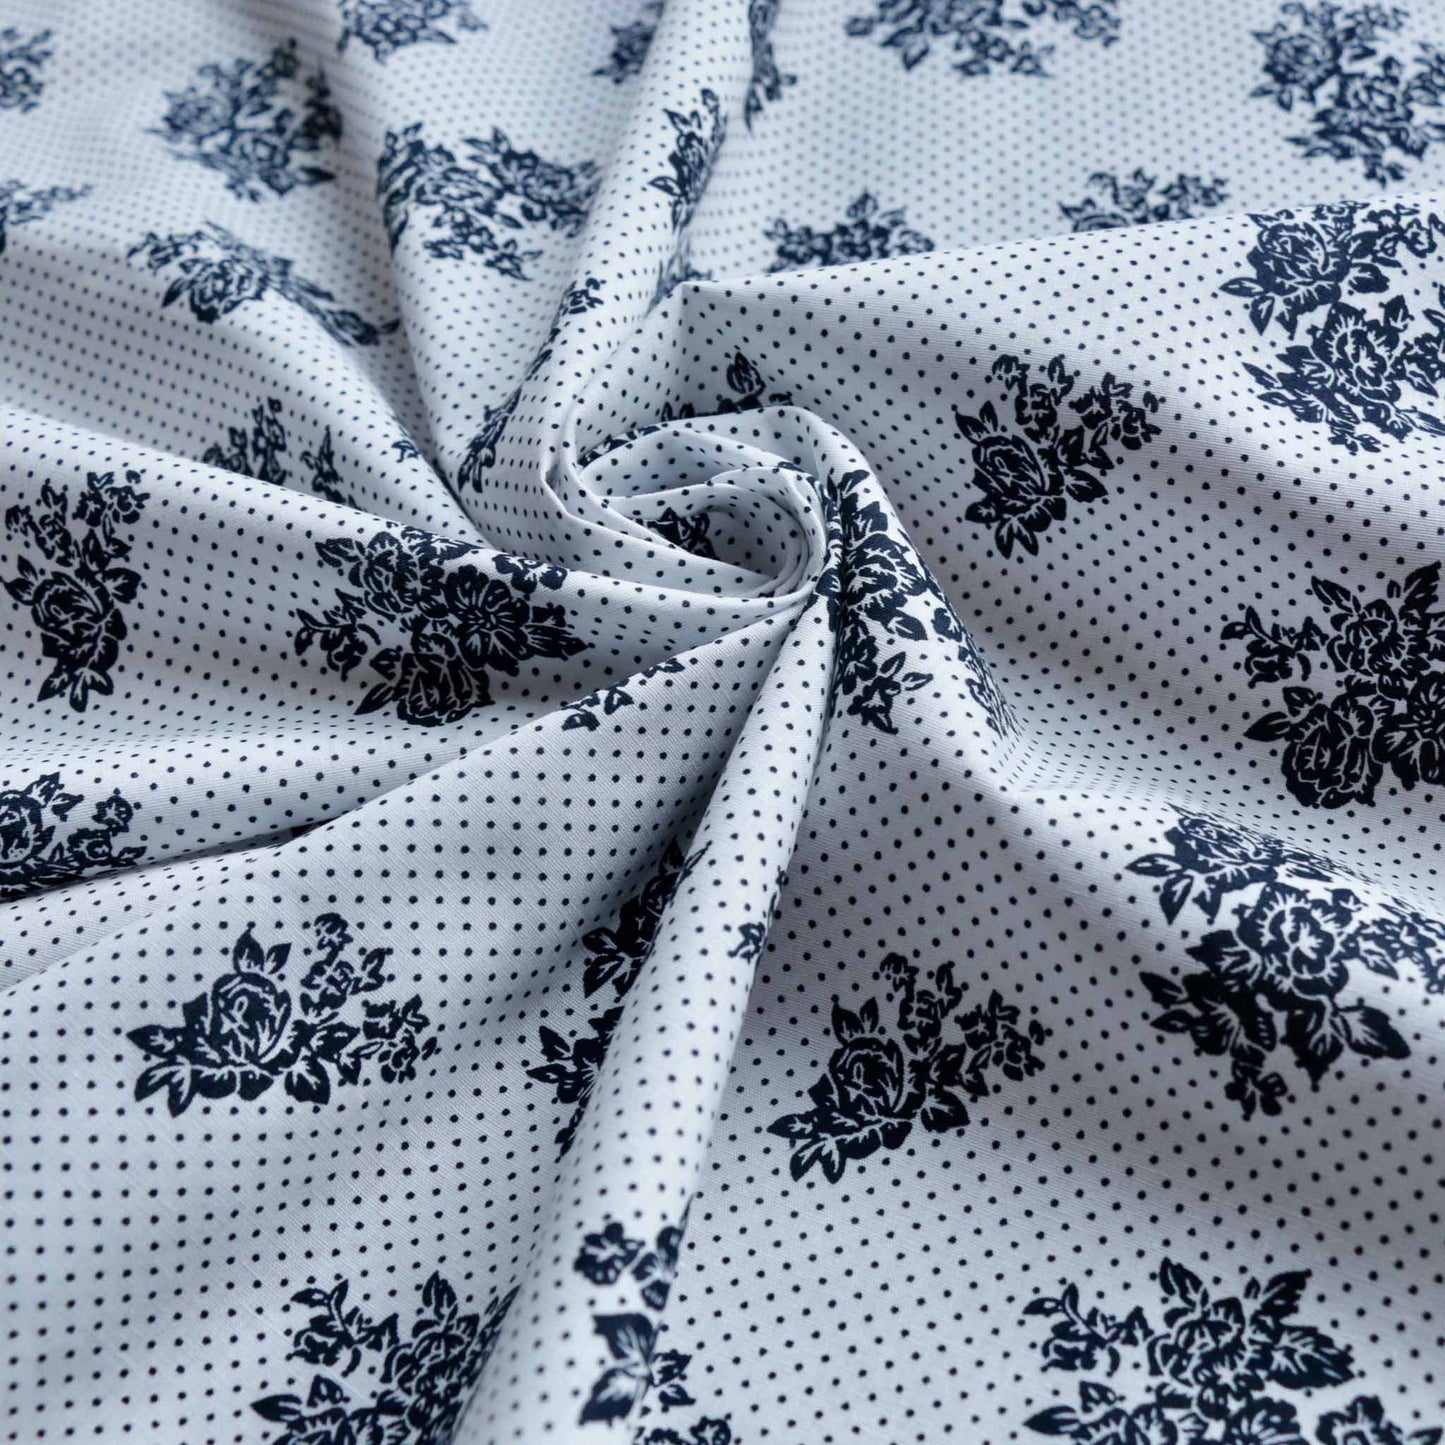 navy polka dots and flowers printed on white cotton poplin dressmaking fabric